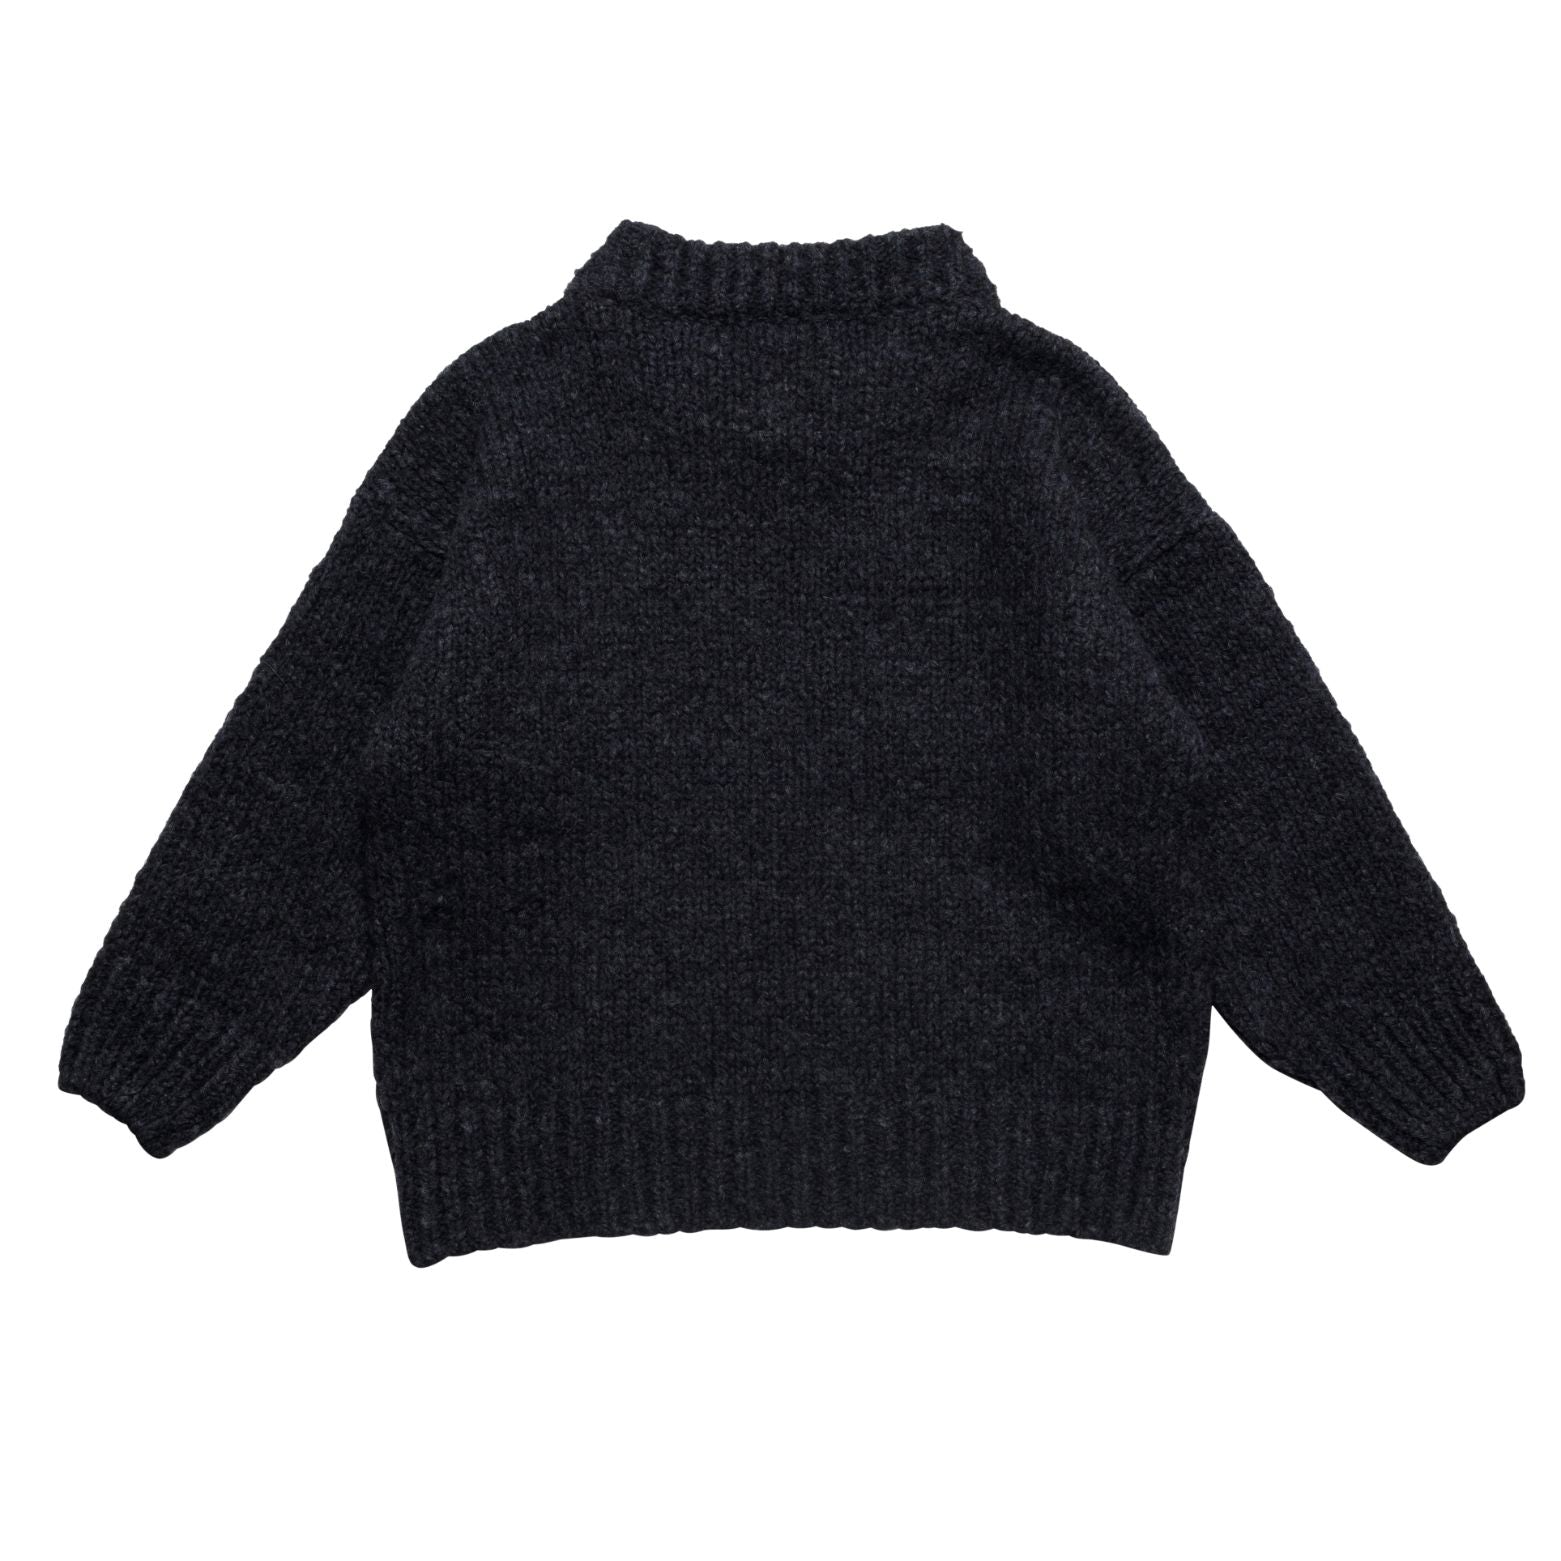 Discovery Jumper - Charcoal